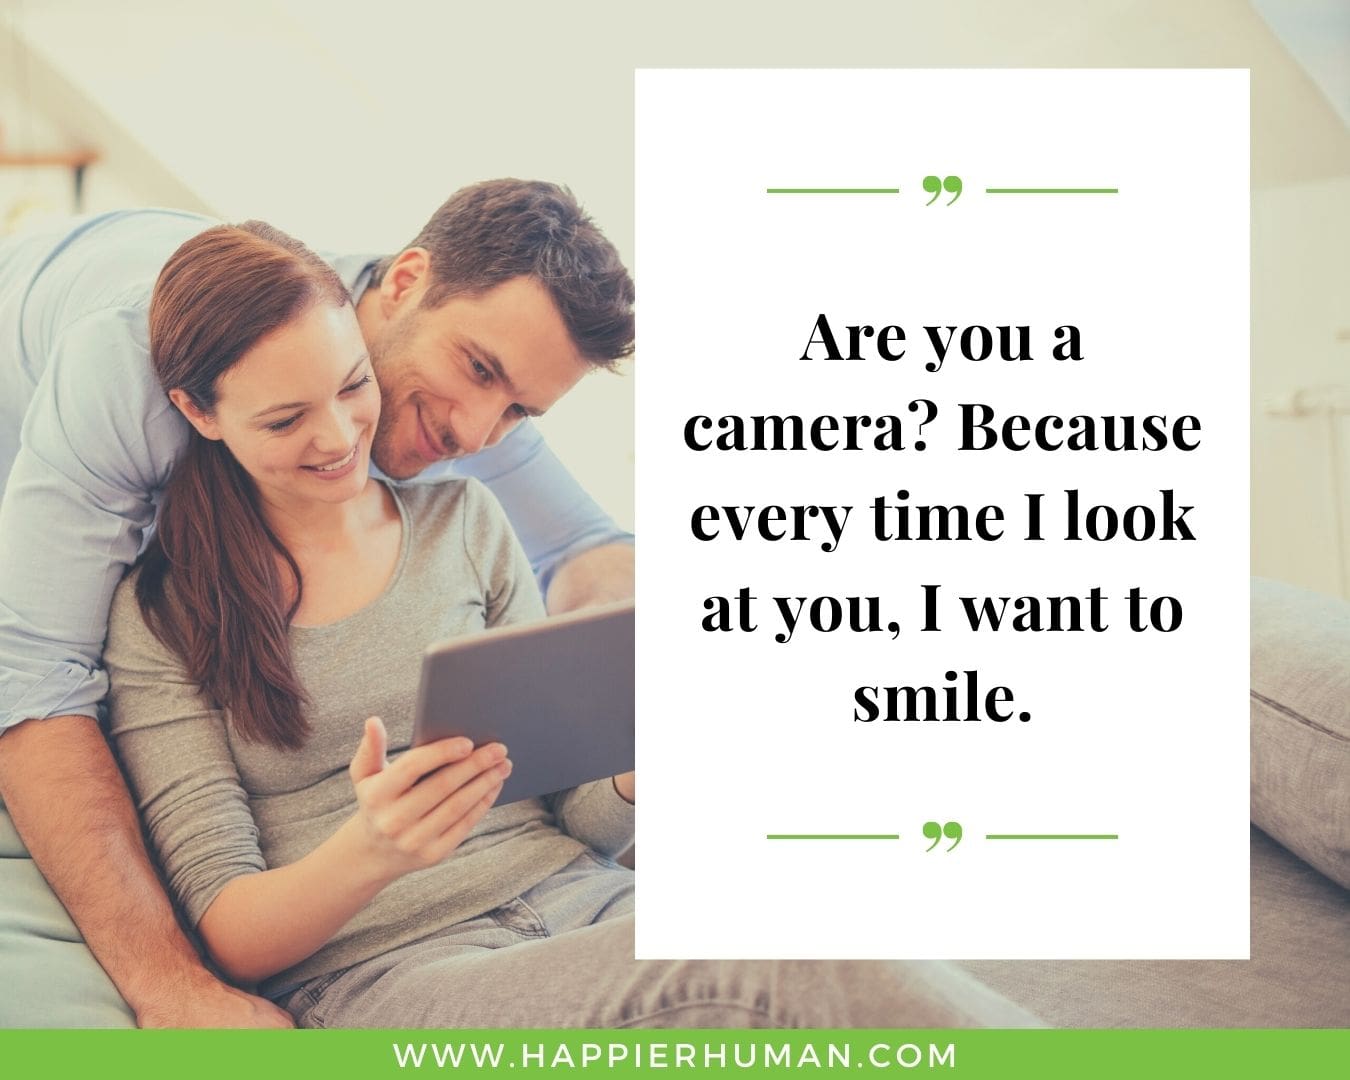 Funny Love Quotes for Her - “Are you a camera? Because every time I look at you, I want to smile.”